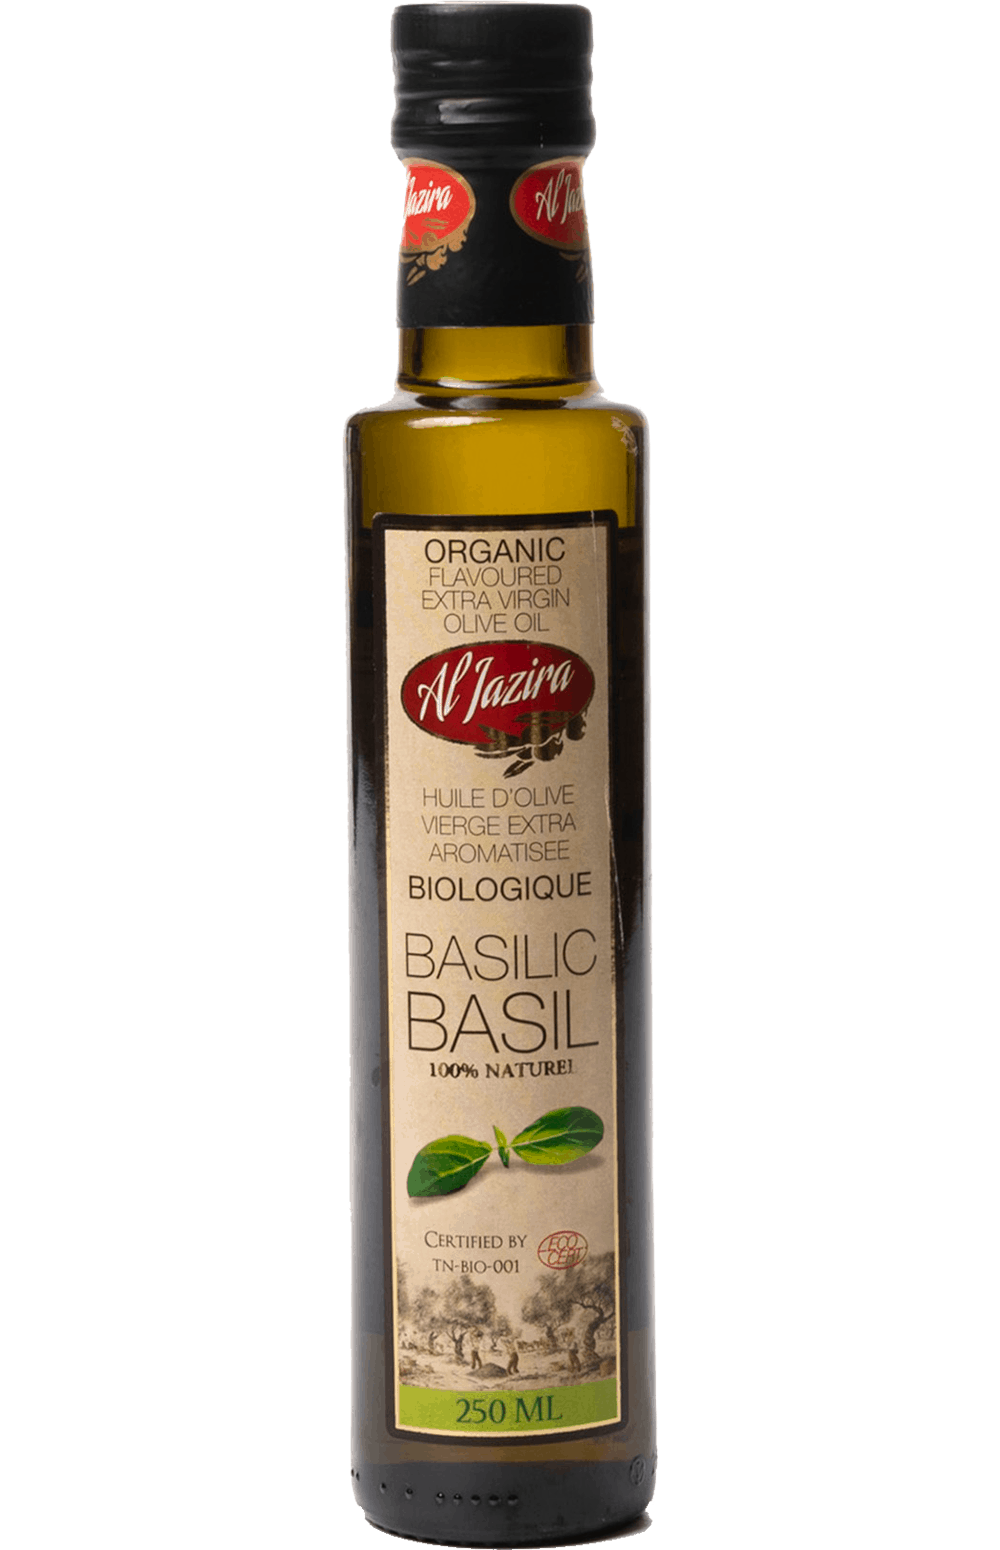 ORGANIC FLAVOURED EXTRA VIRGIN OLIVE OIL WITH BASILIC BASIL